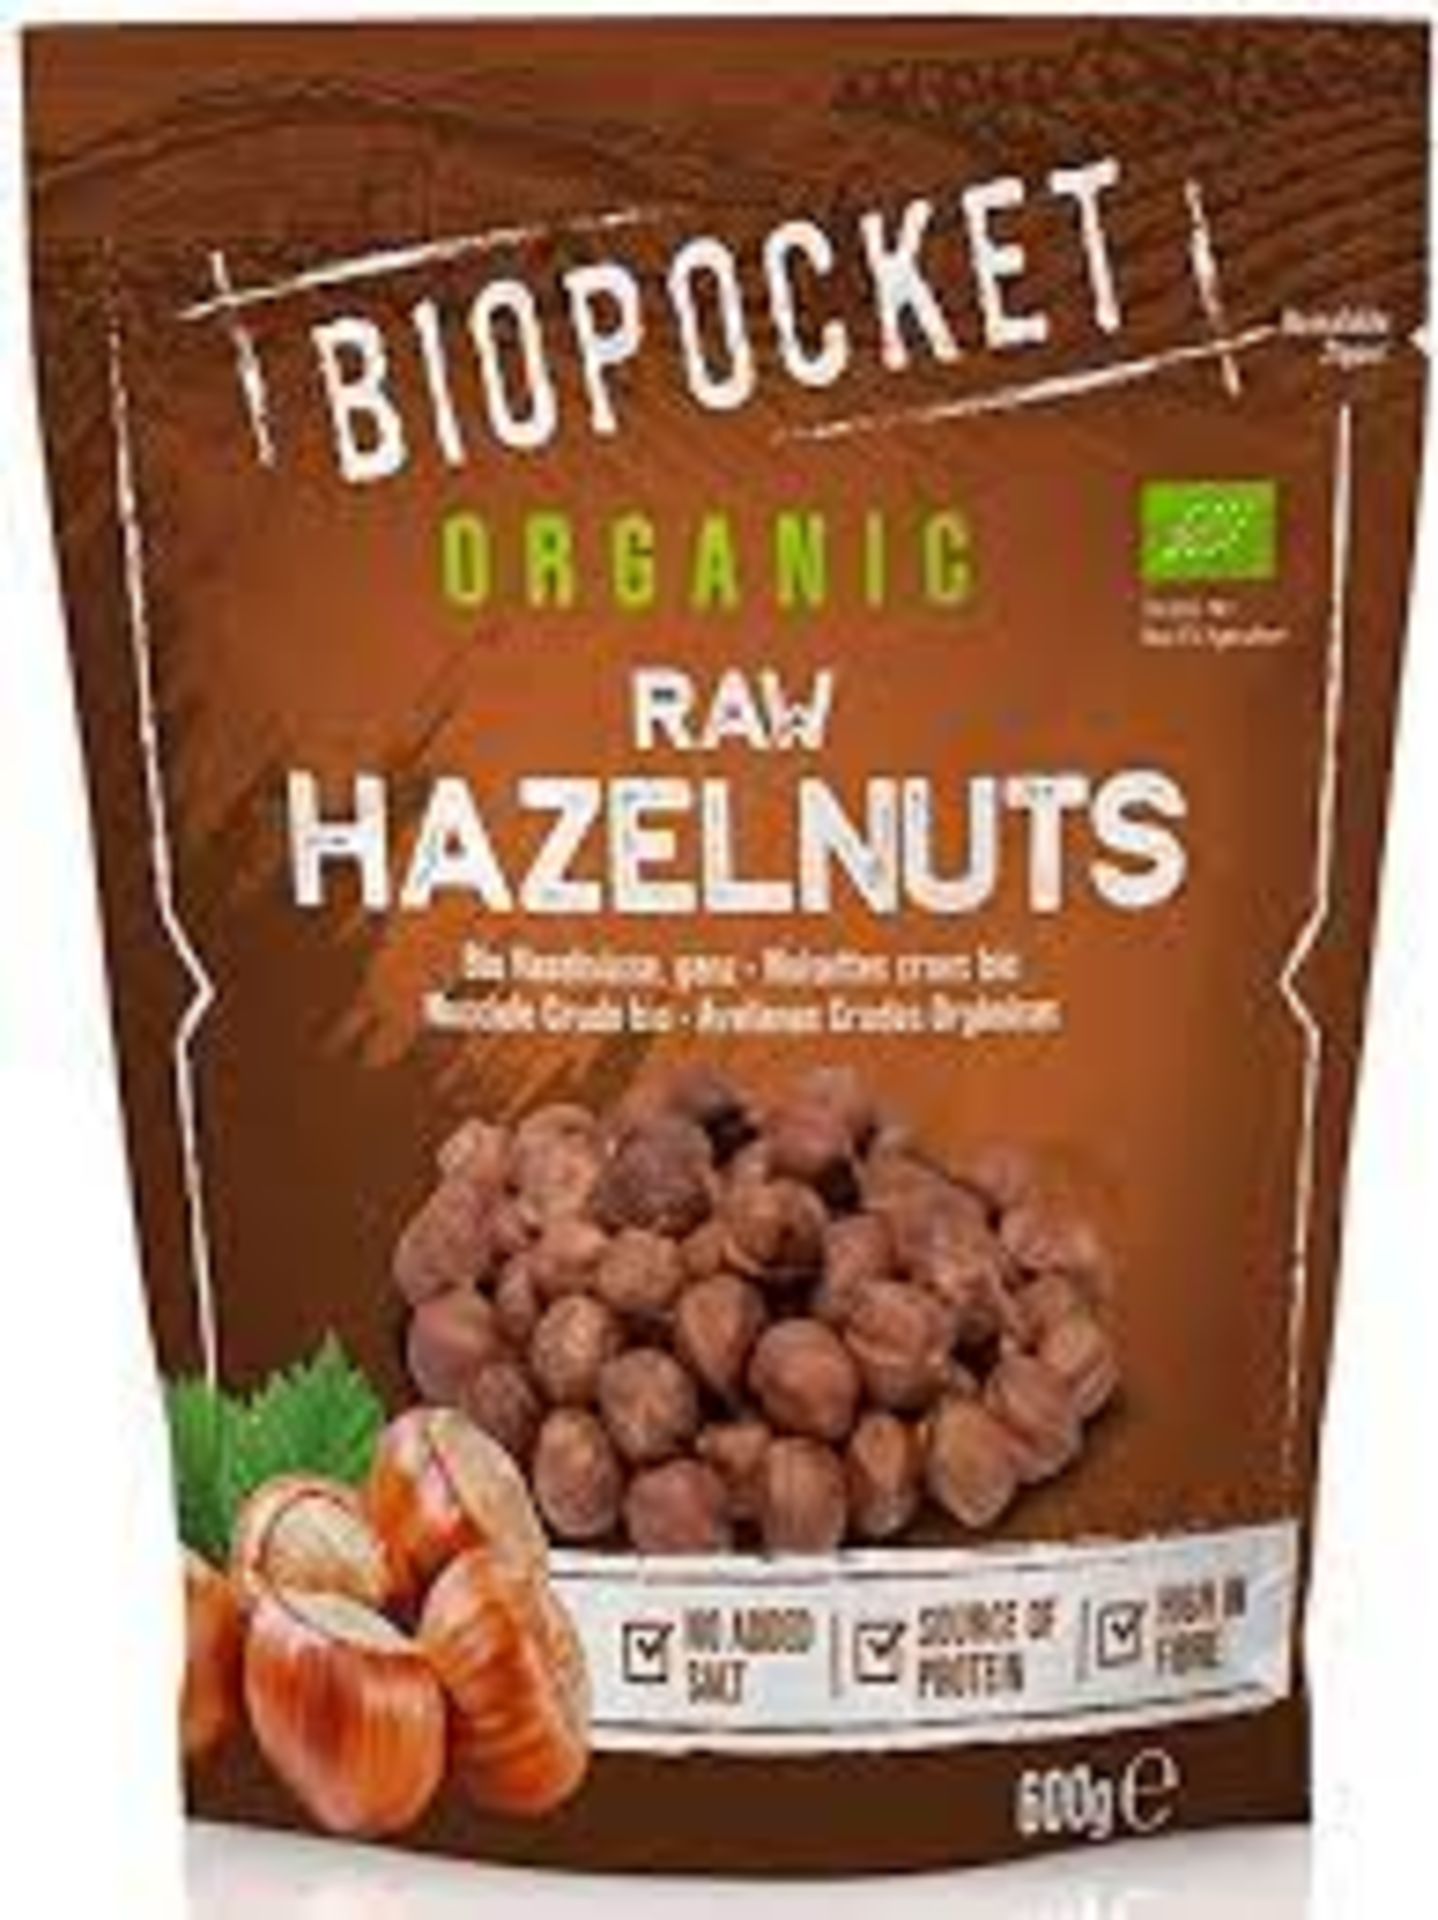 RRP £1199 (Approx. Count 129) (C30) spW32n6786N 47 x Biopocket Organic Roasted Hazelnuts 600g - Image 3 of 3